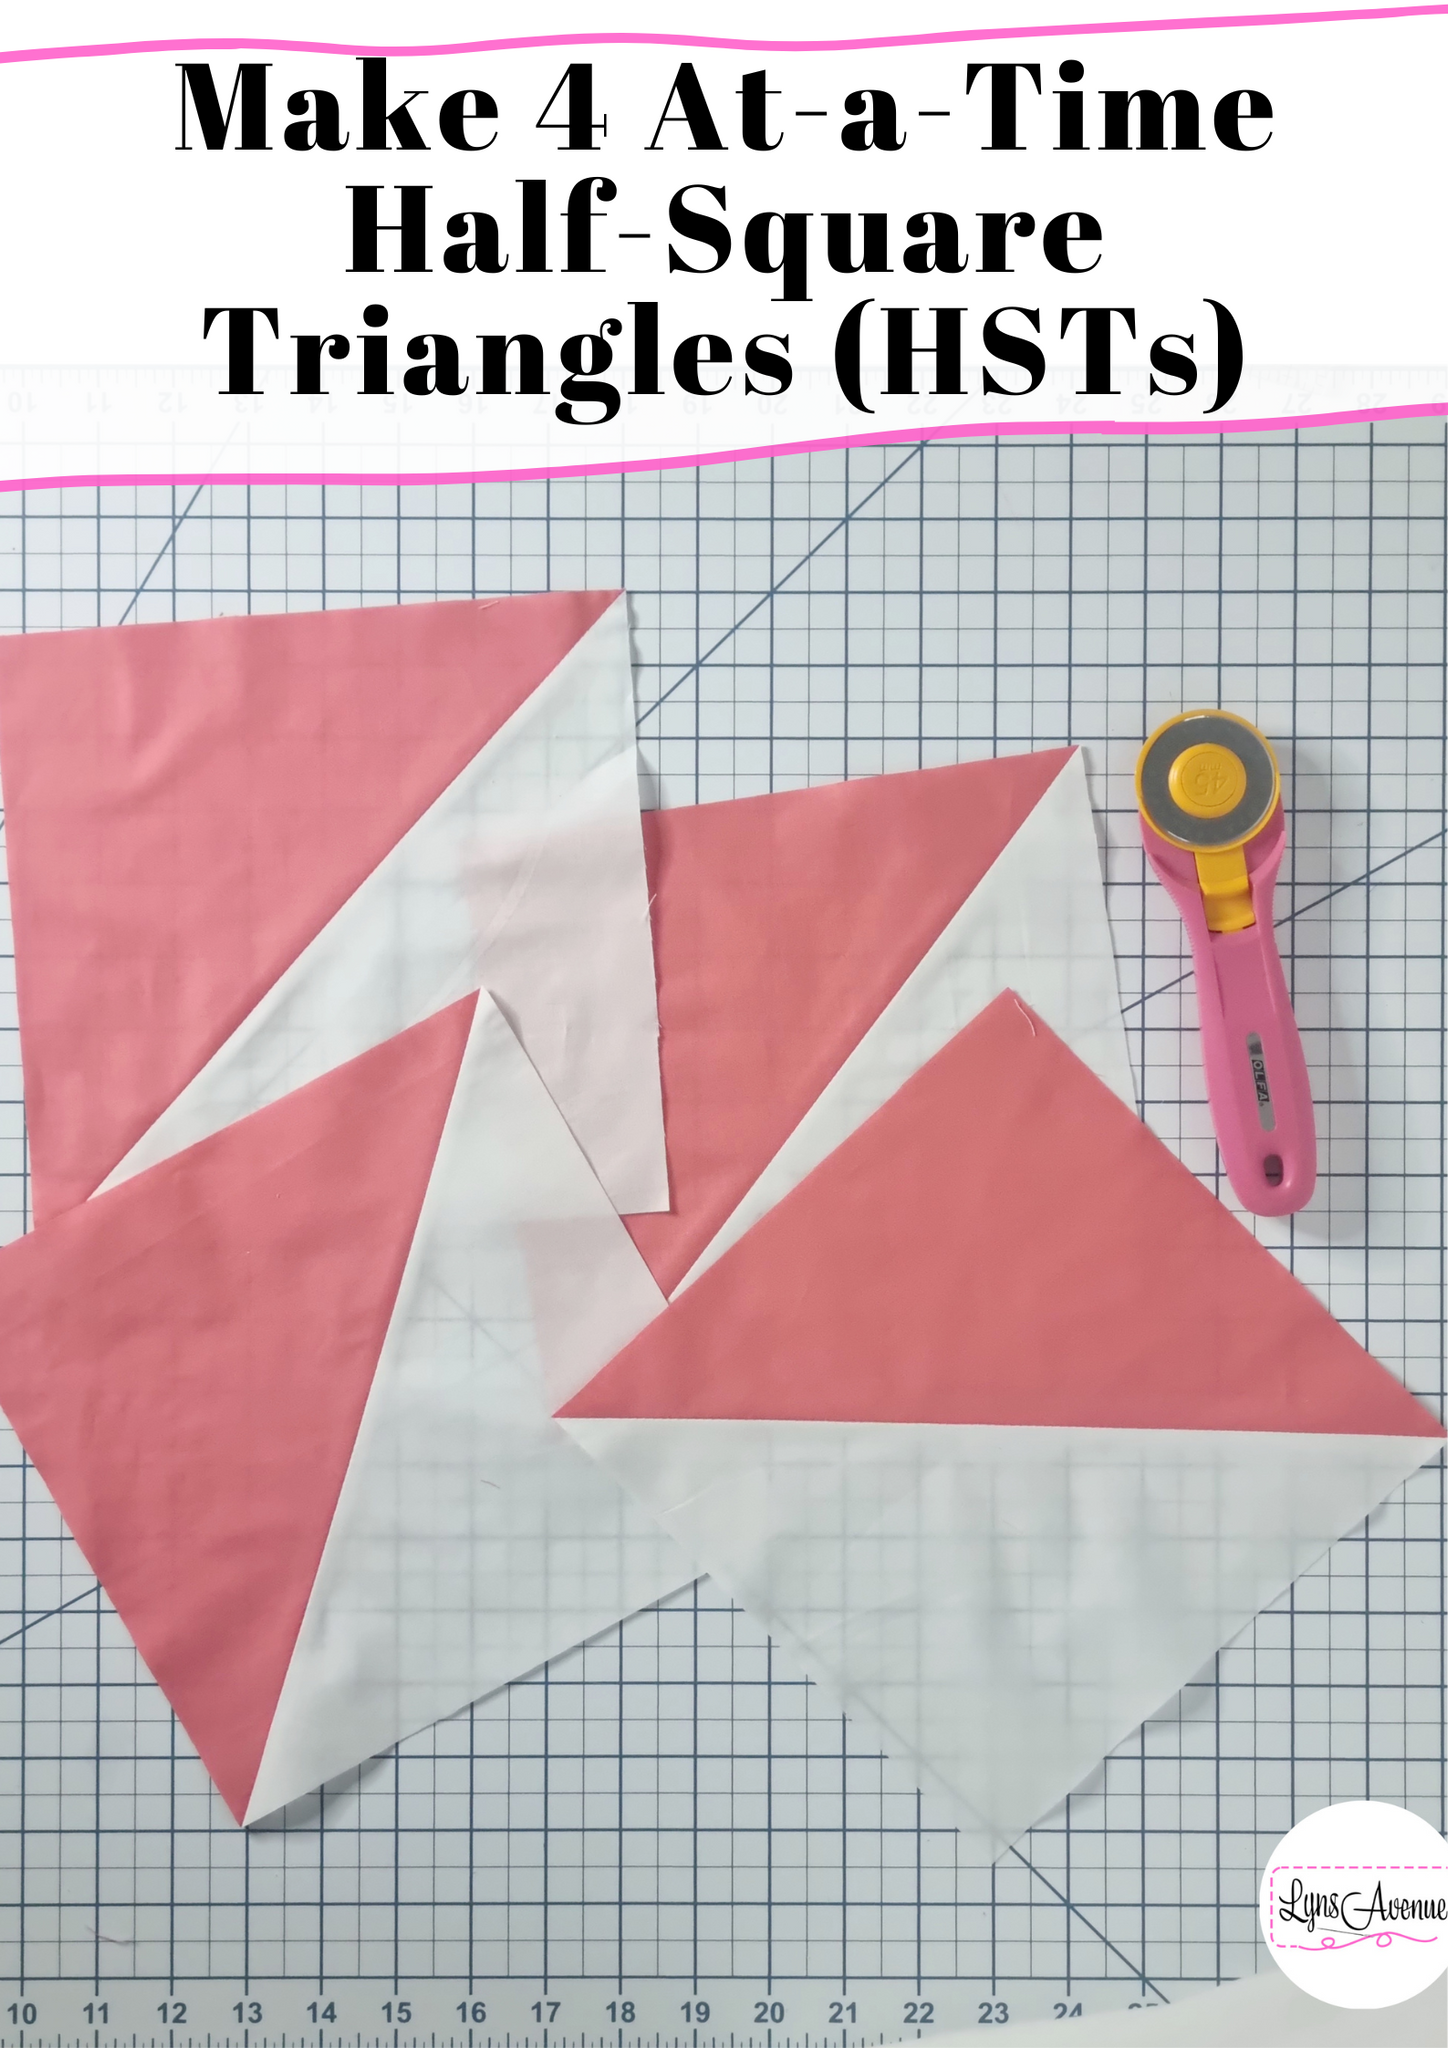 how to make 4-at-a-time half-square triangles